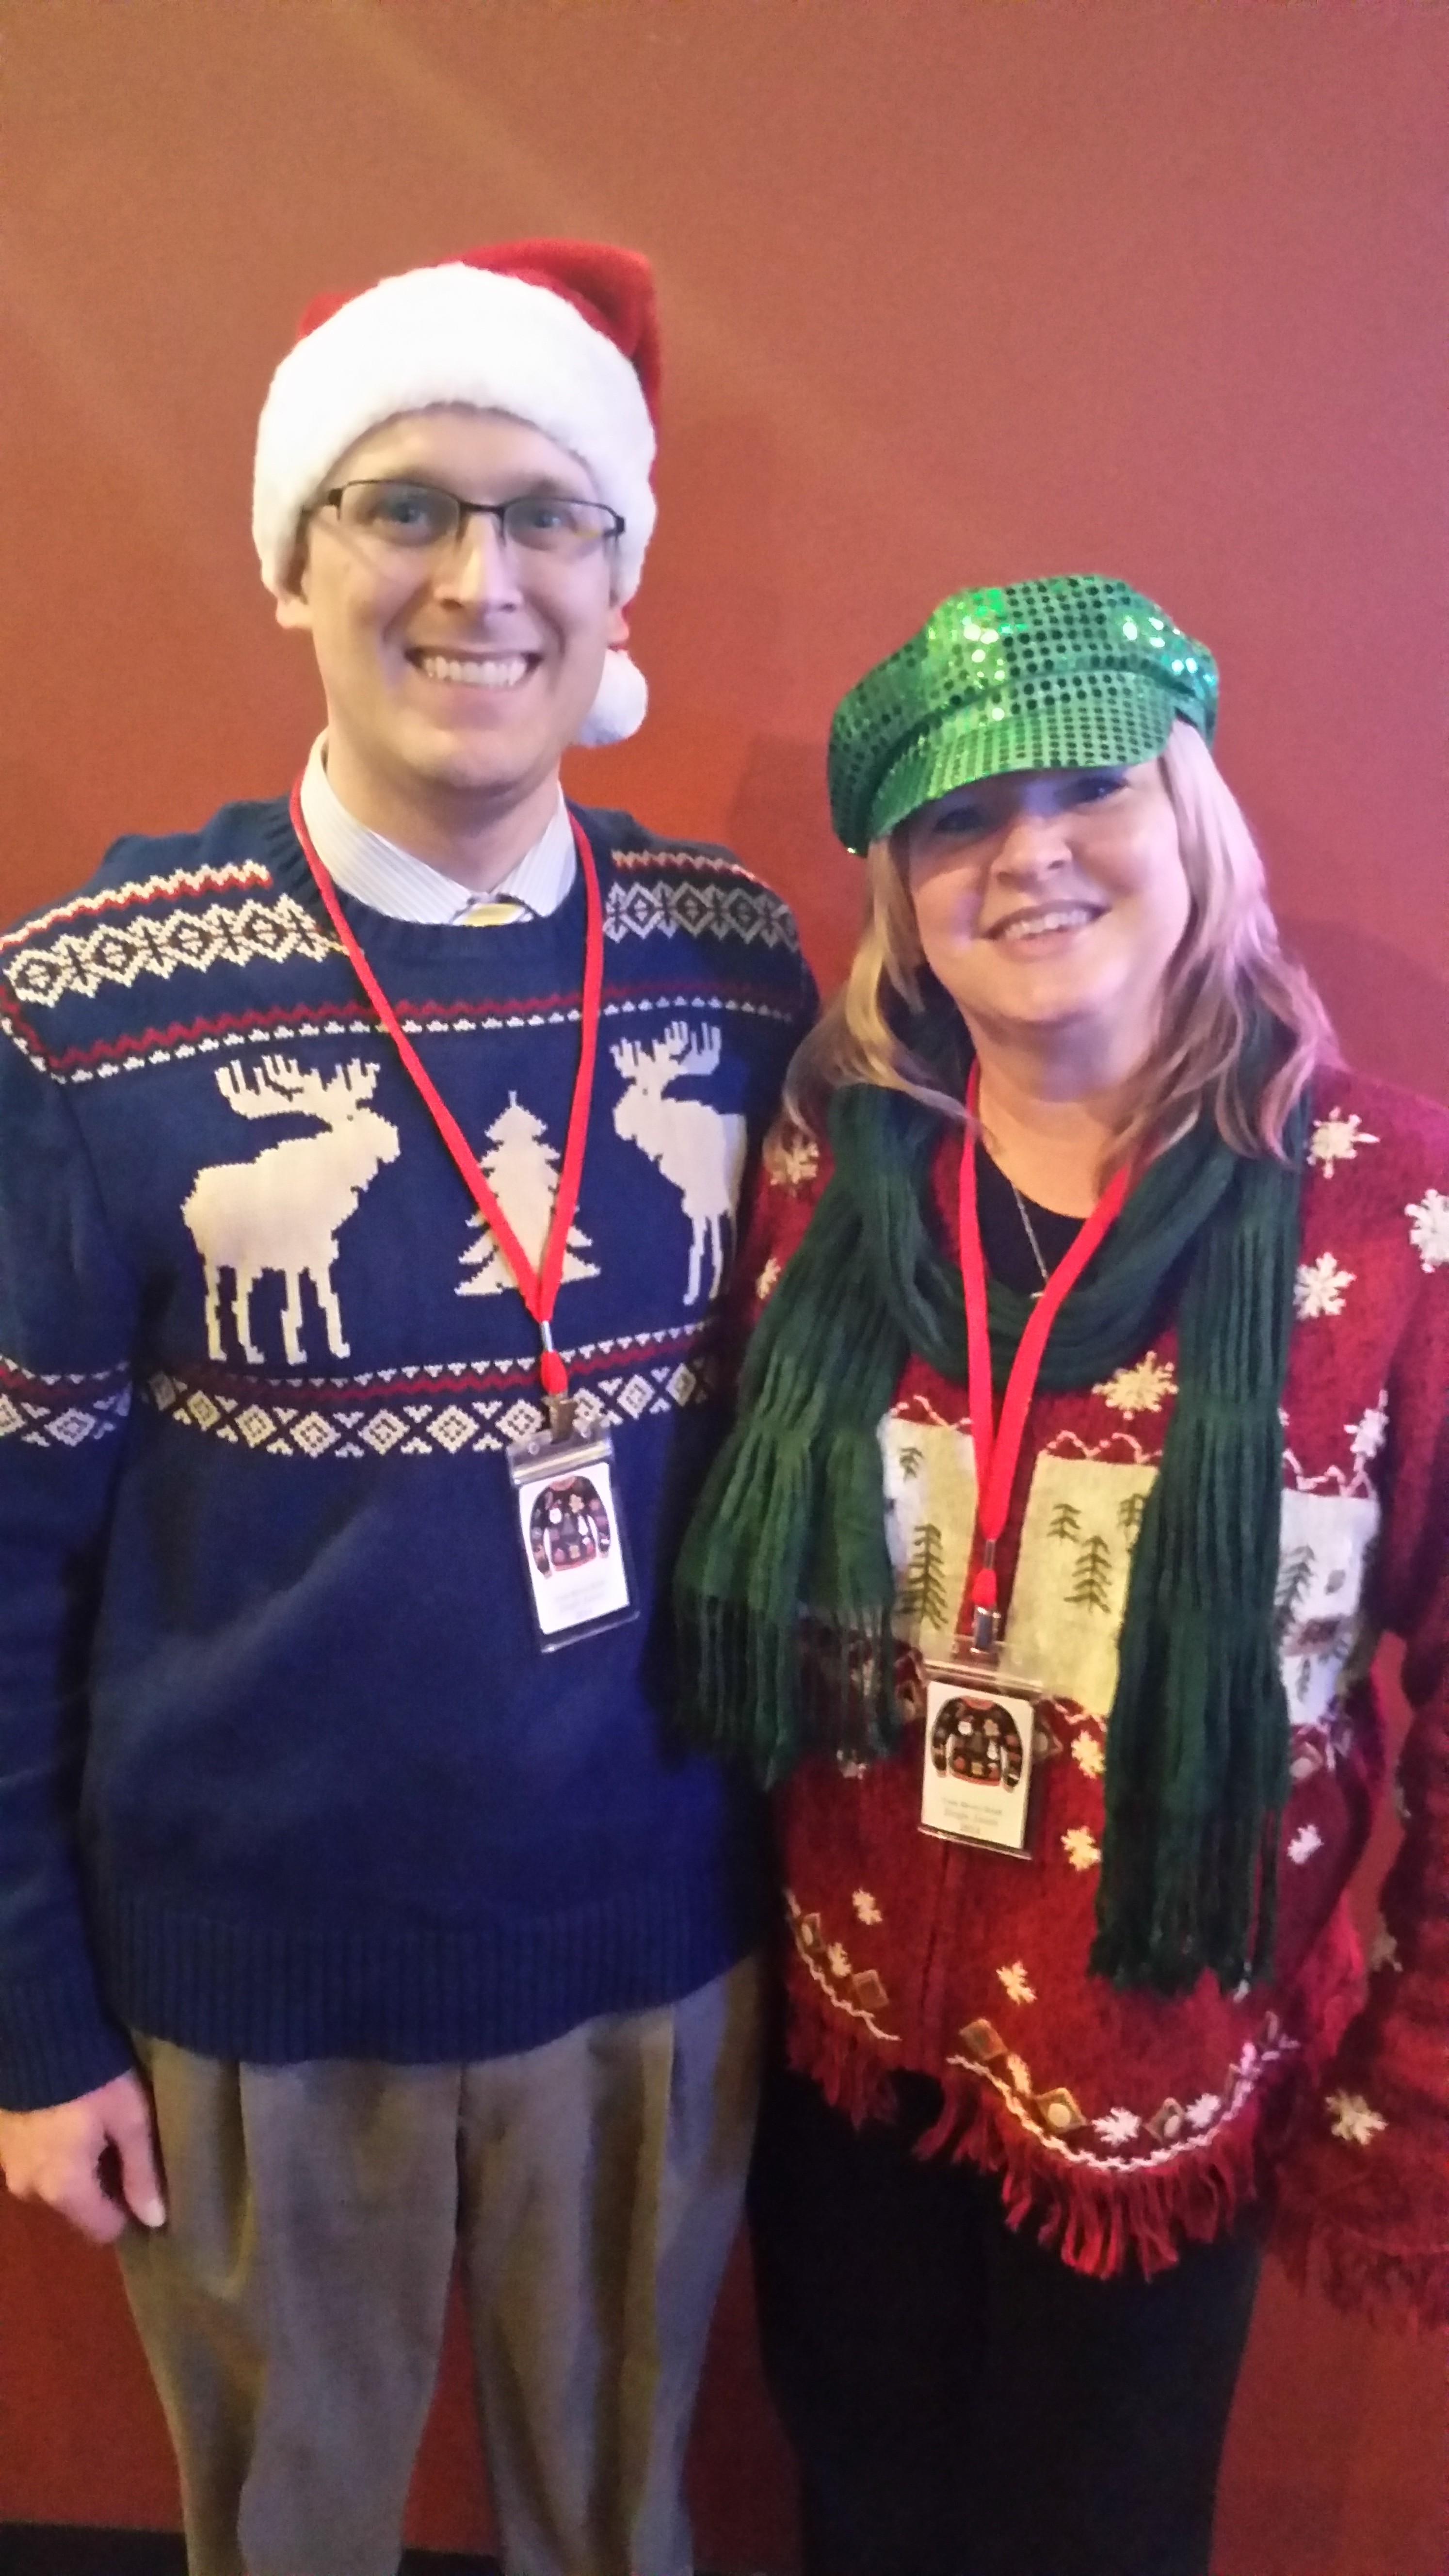 David & Kathy supporting Rotary at the Ugly Christmas Sweater Event!